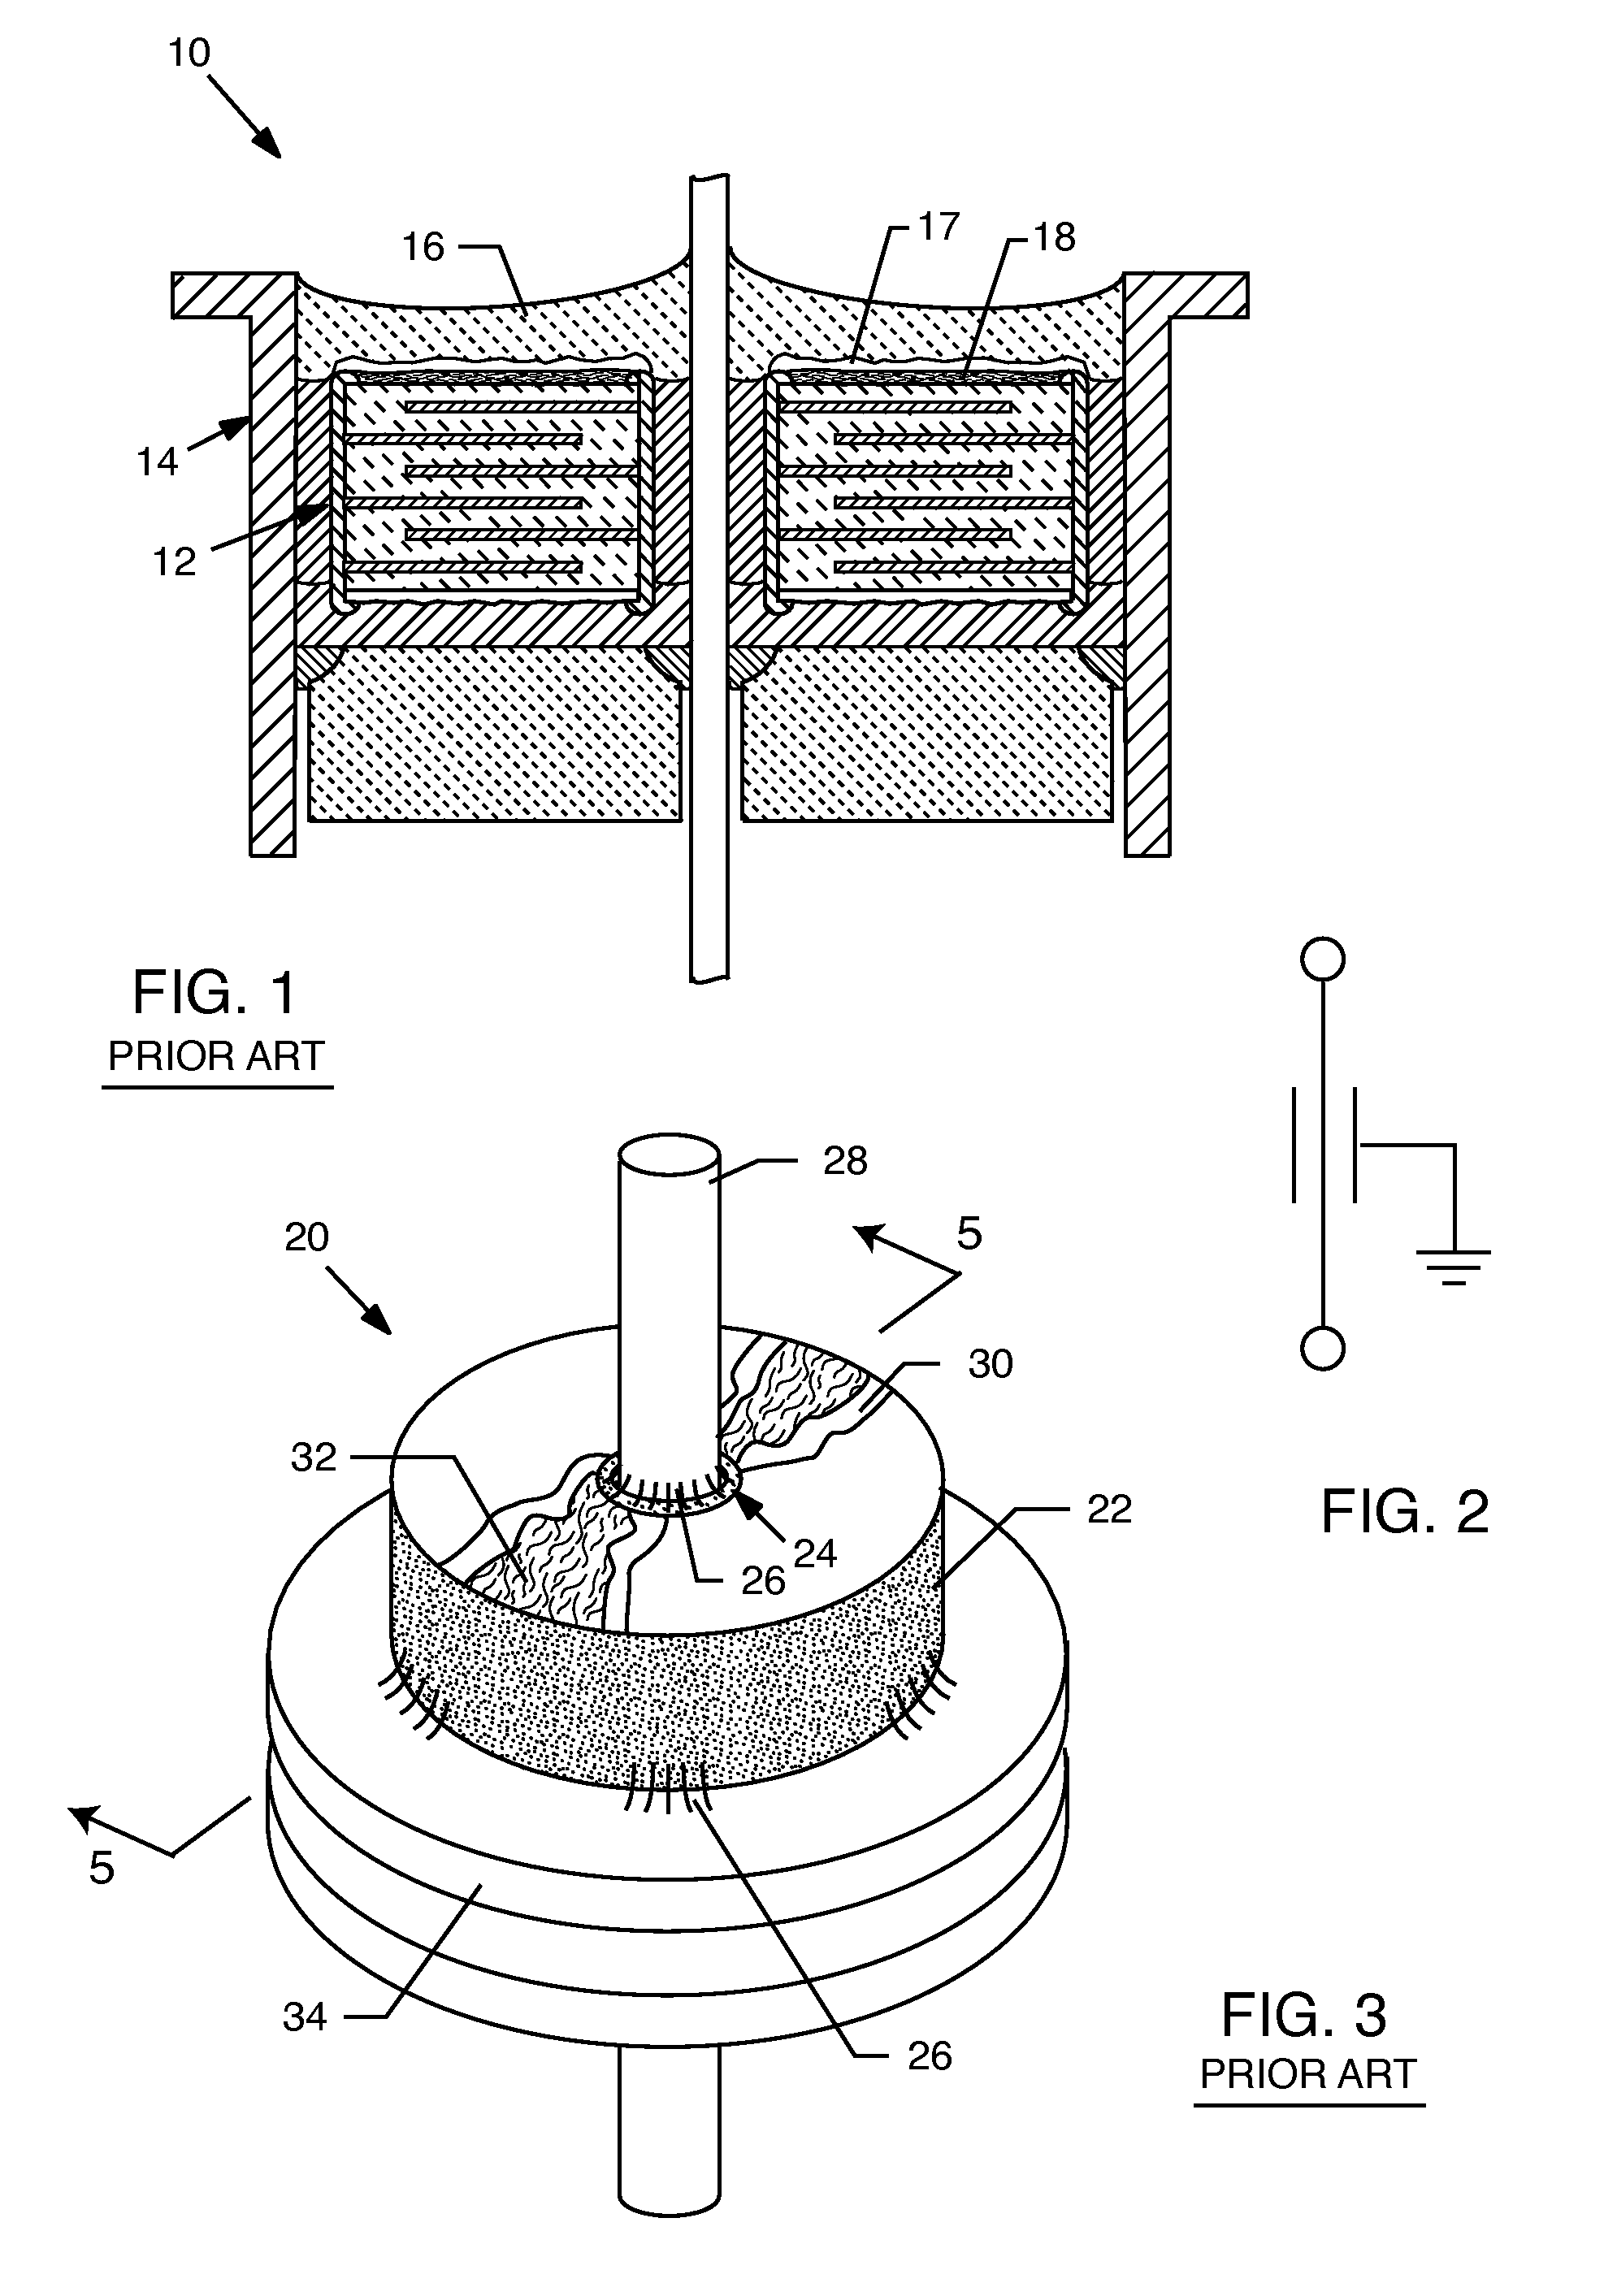 Passive electronic network components designed for direct body fluid exposure